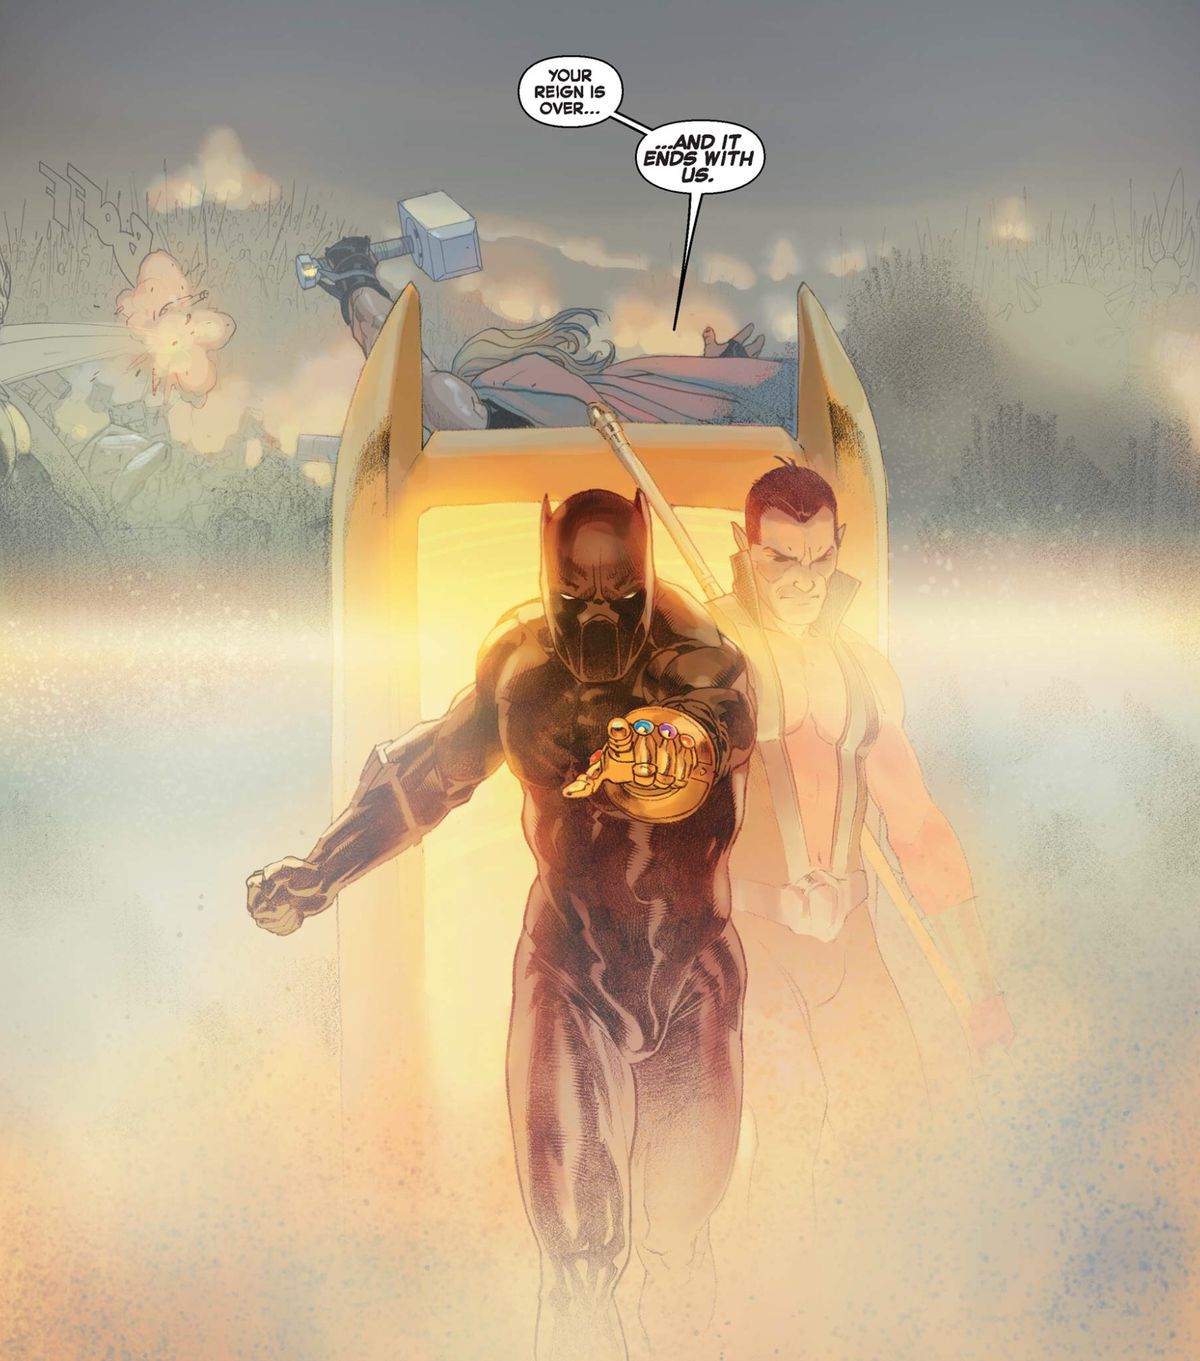 Namor and Black Panther step out of the Siege Perilous. Black Panther has the Infinity Gauntlet on, and is pointing ahead of himself. “Your reign is over,” he says, “And it ends with us,” in Secret Wars, Marvel Comics (2015). 